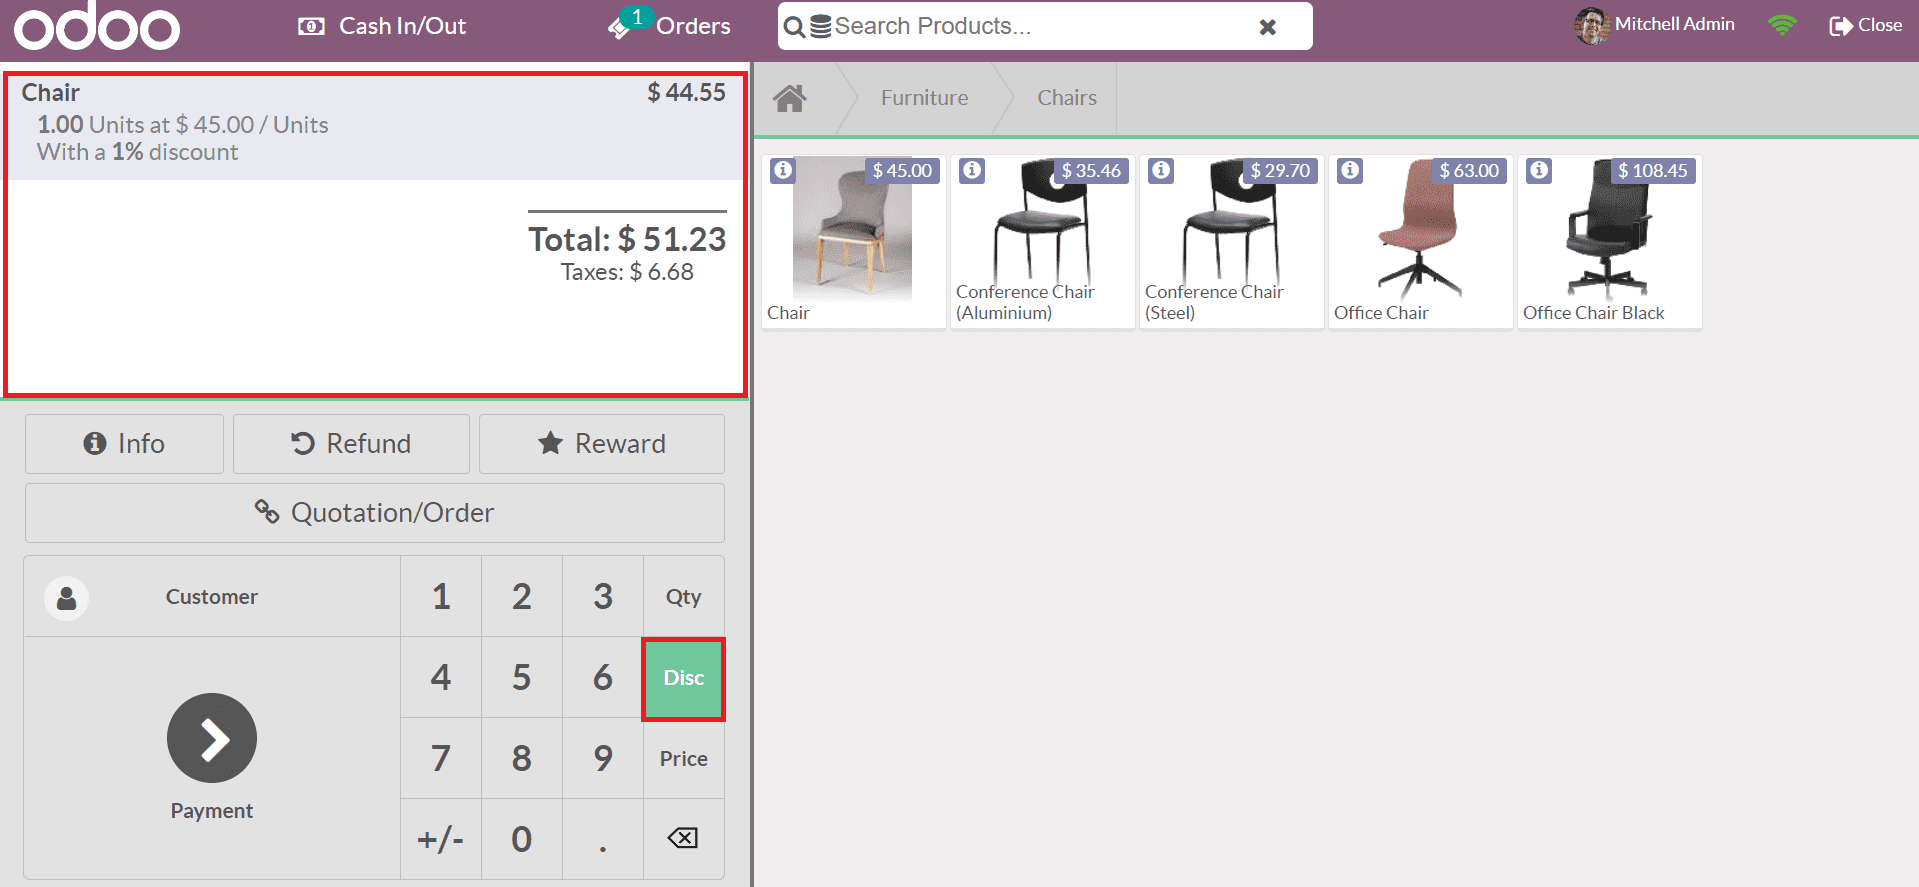 pos-configuration-for-retail-management-with-the-odoo-15-erp-cybrosys